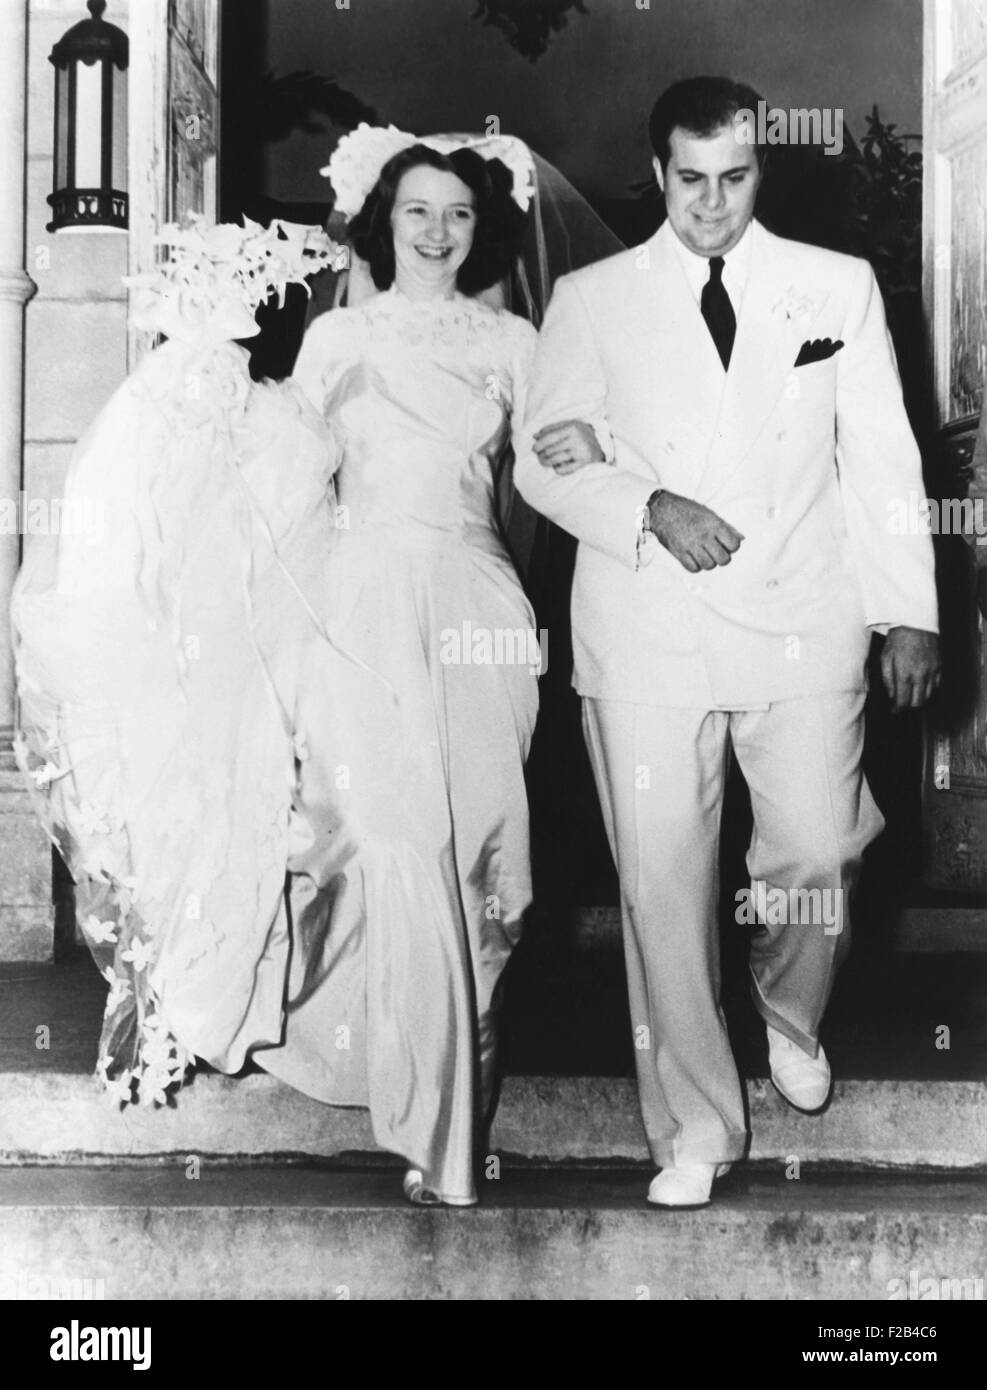 Al Capone's son takes a bride. Mr. and Mrs. Albert Francis Capone, emerging from St. Patrick's Church in Miami Beach after a quiet wedding. The former Diana Ruth Casey was Sonny's high school sweetheart. They had four daughters and led a straight and lawful life in Miami Beach. Dec. 30, 1941. - (CSU_2015_5_1) Stock Photo